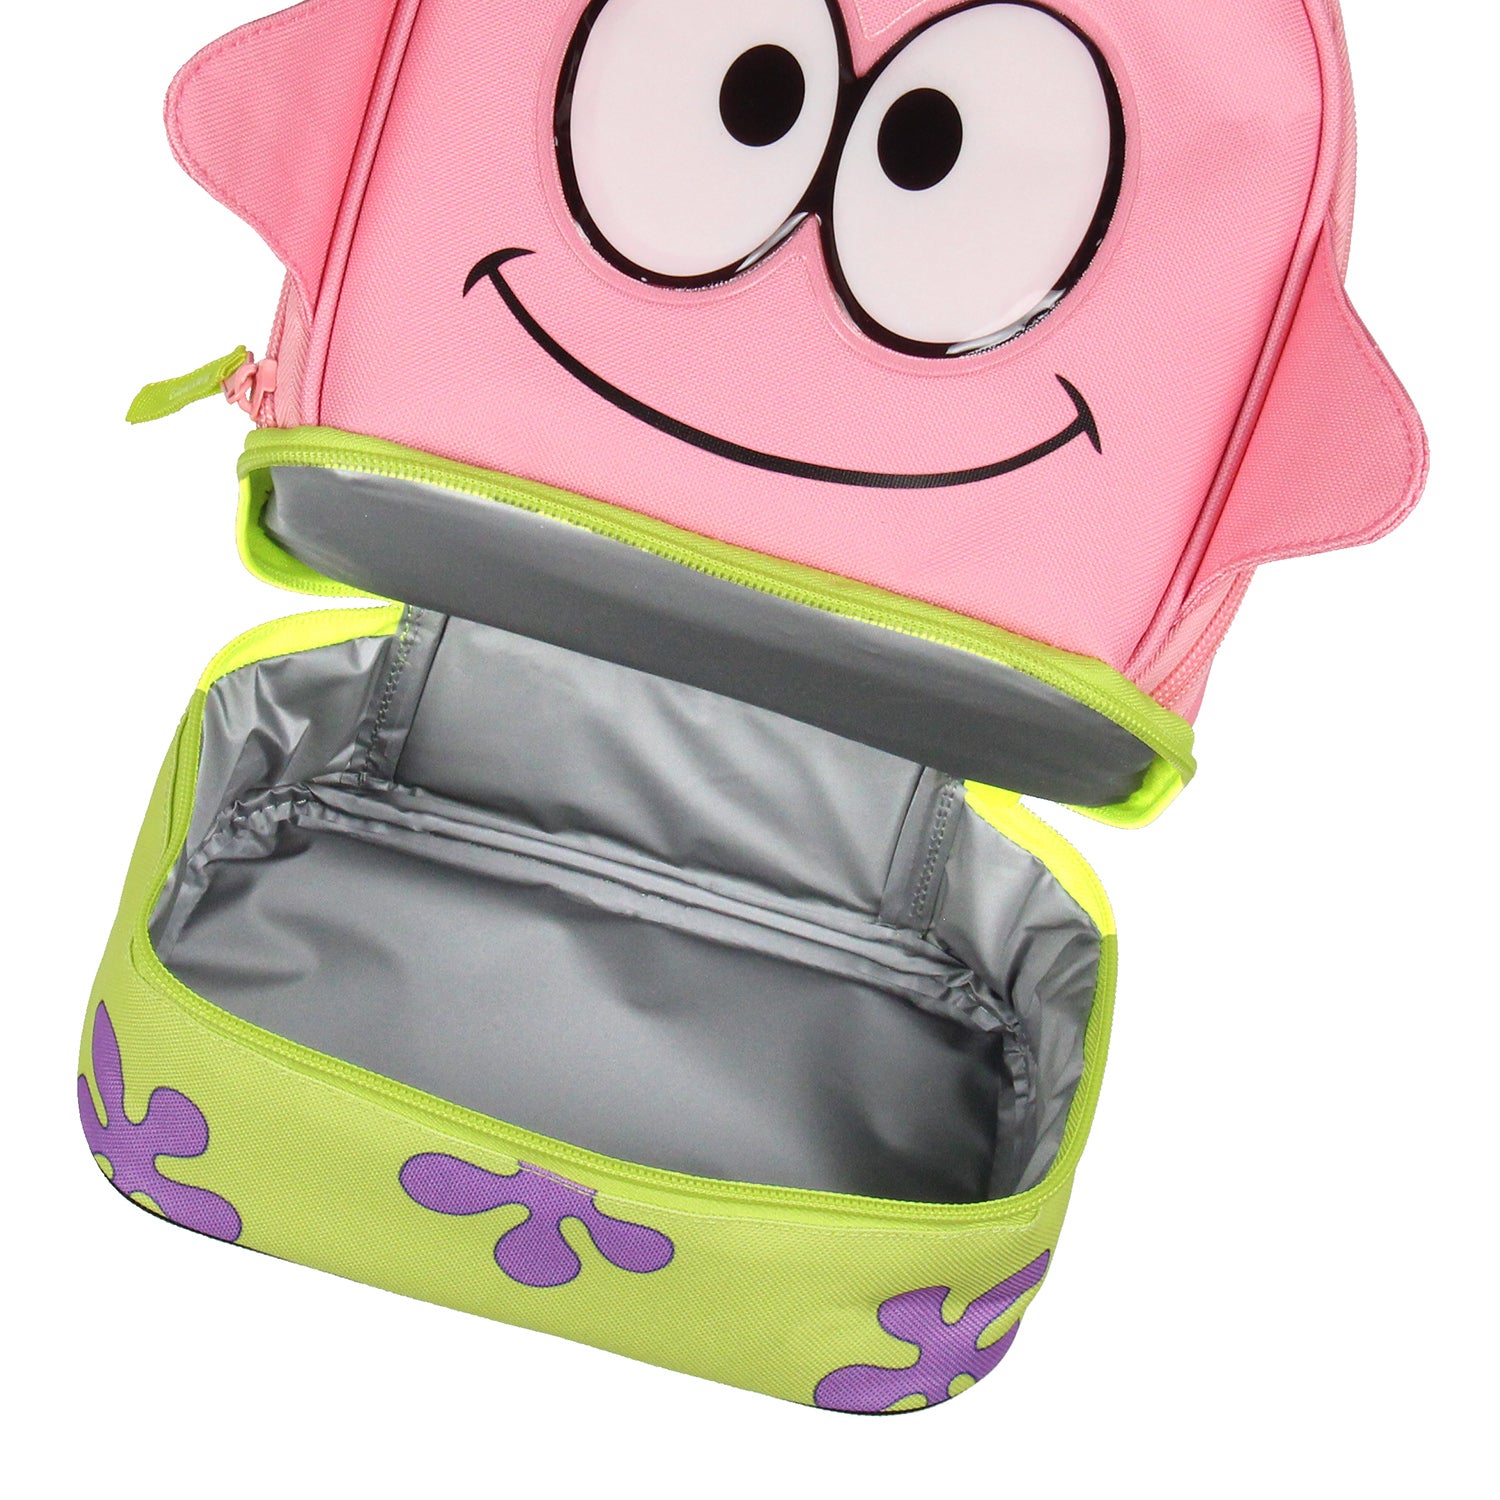 Spongebob SquarePants Lunch Box Patrick Star 3D Character Dual Compartment Insulated Lunch Bag Tote